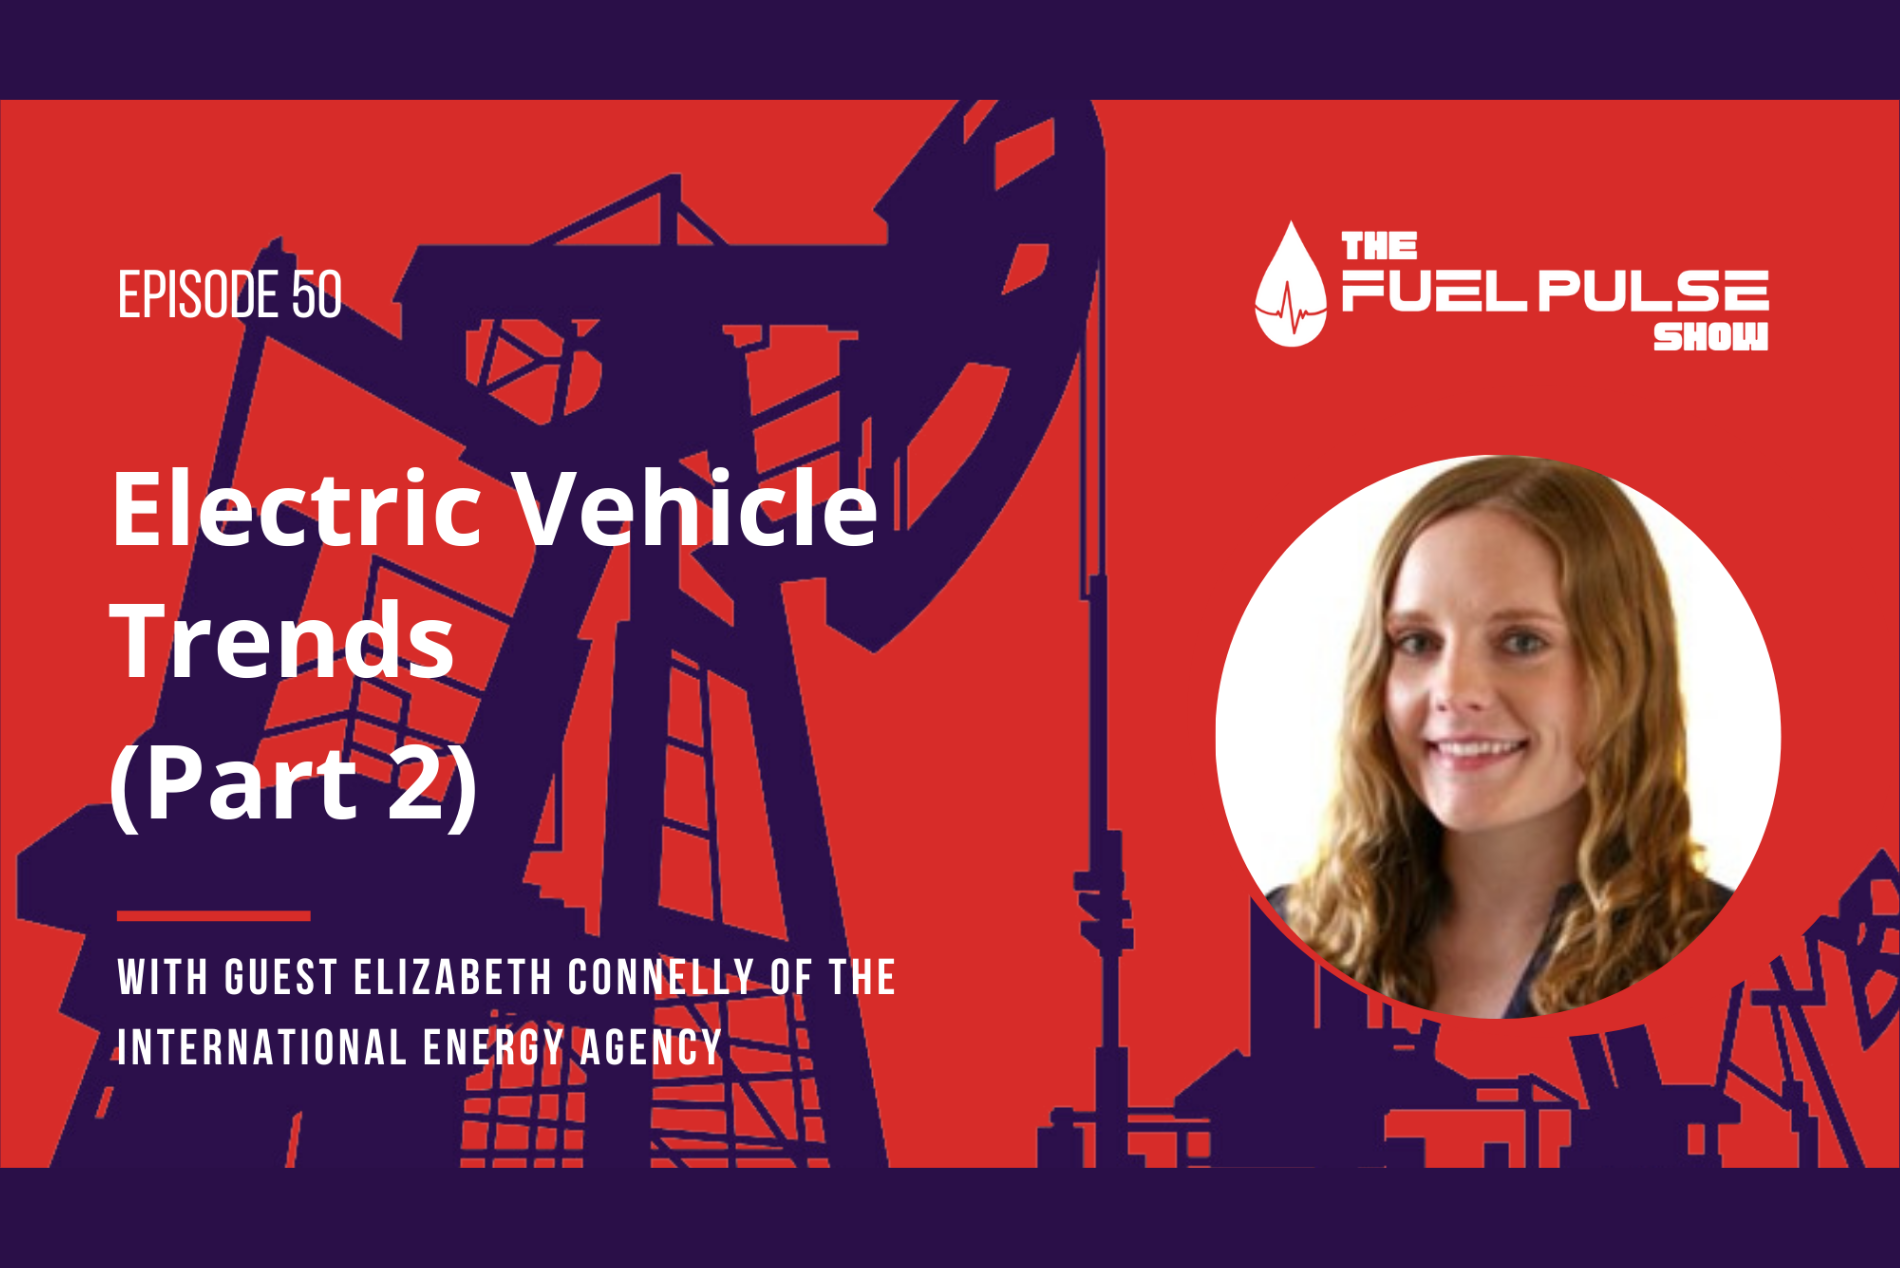 Episode 50 - Electric Vehicle Trends with Elizabeth Connelly - Part 2